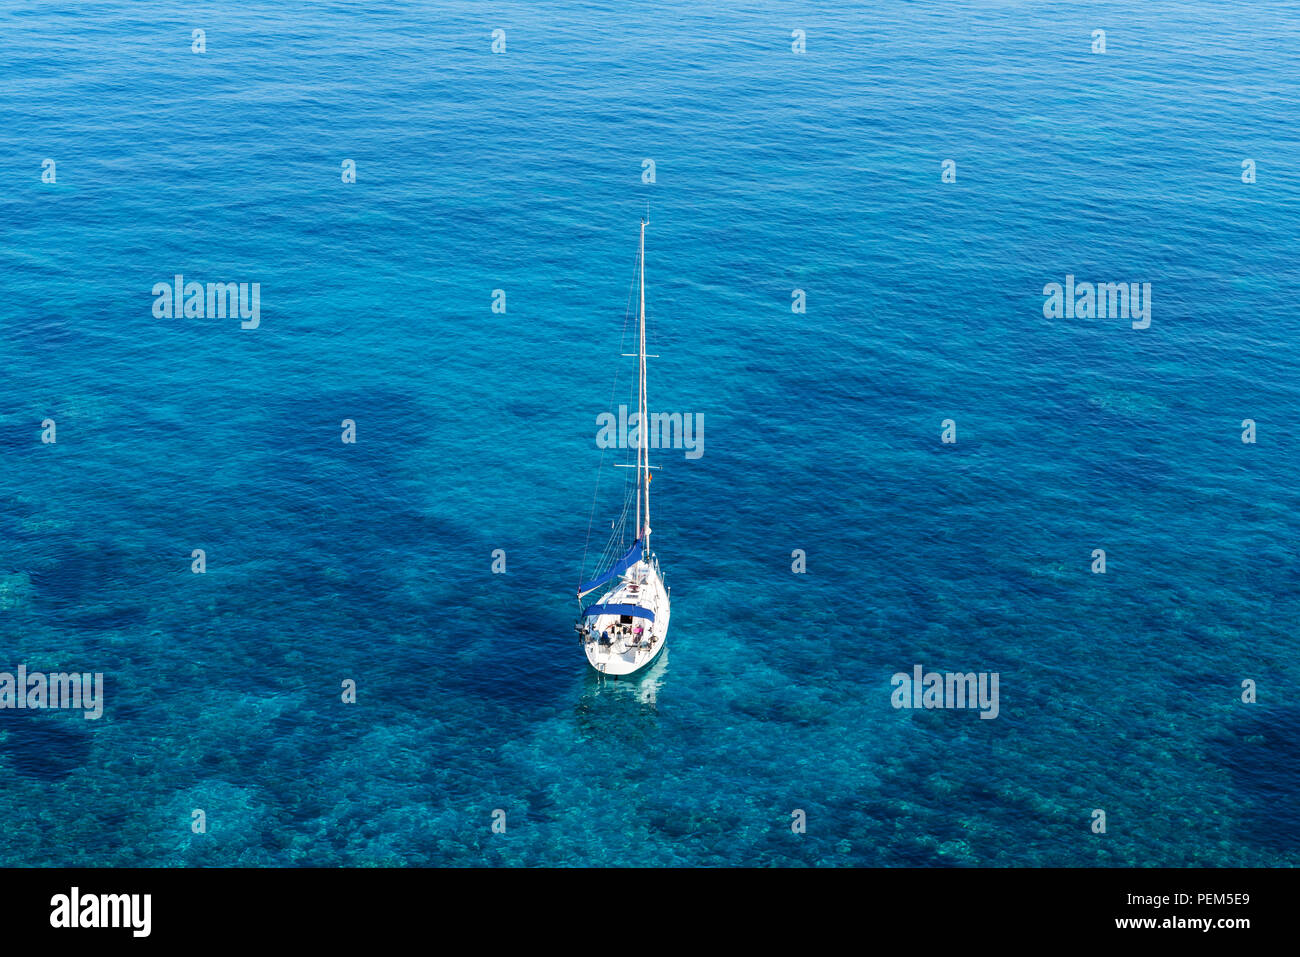 high angle view of sailboat on turquoise sea Stock Photo